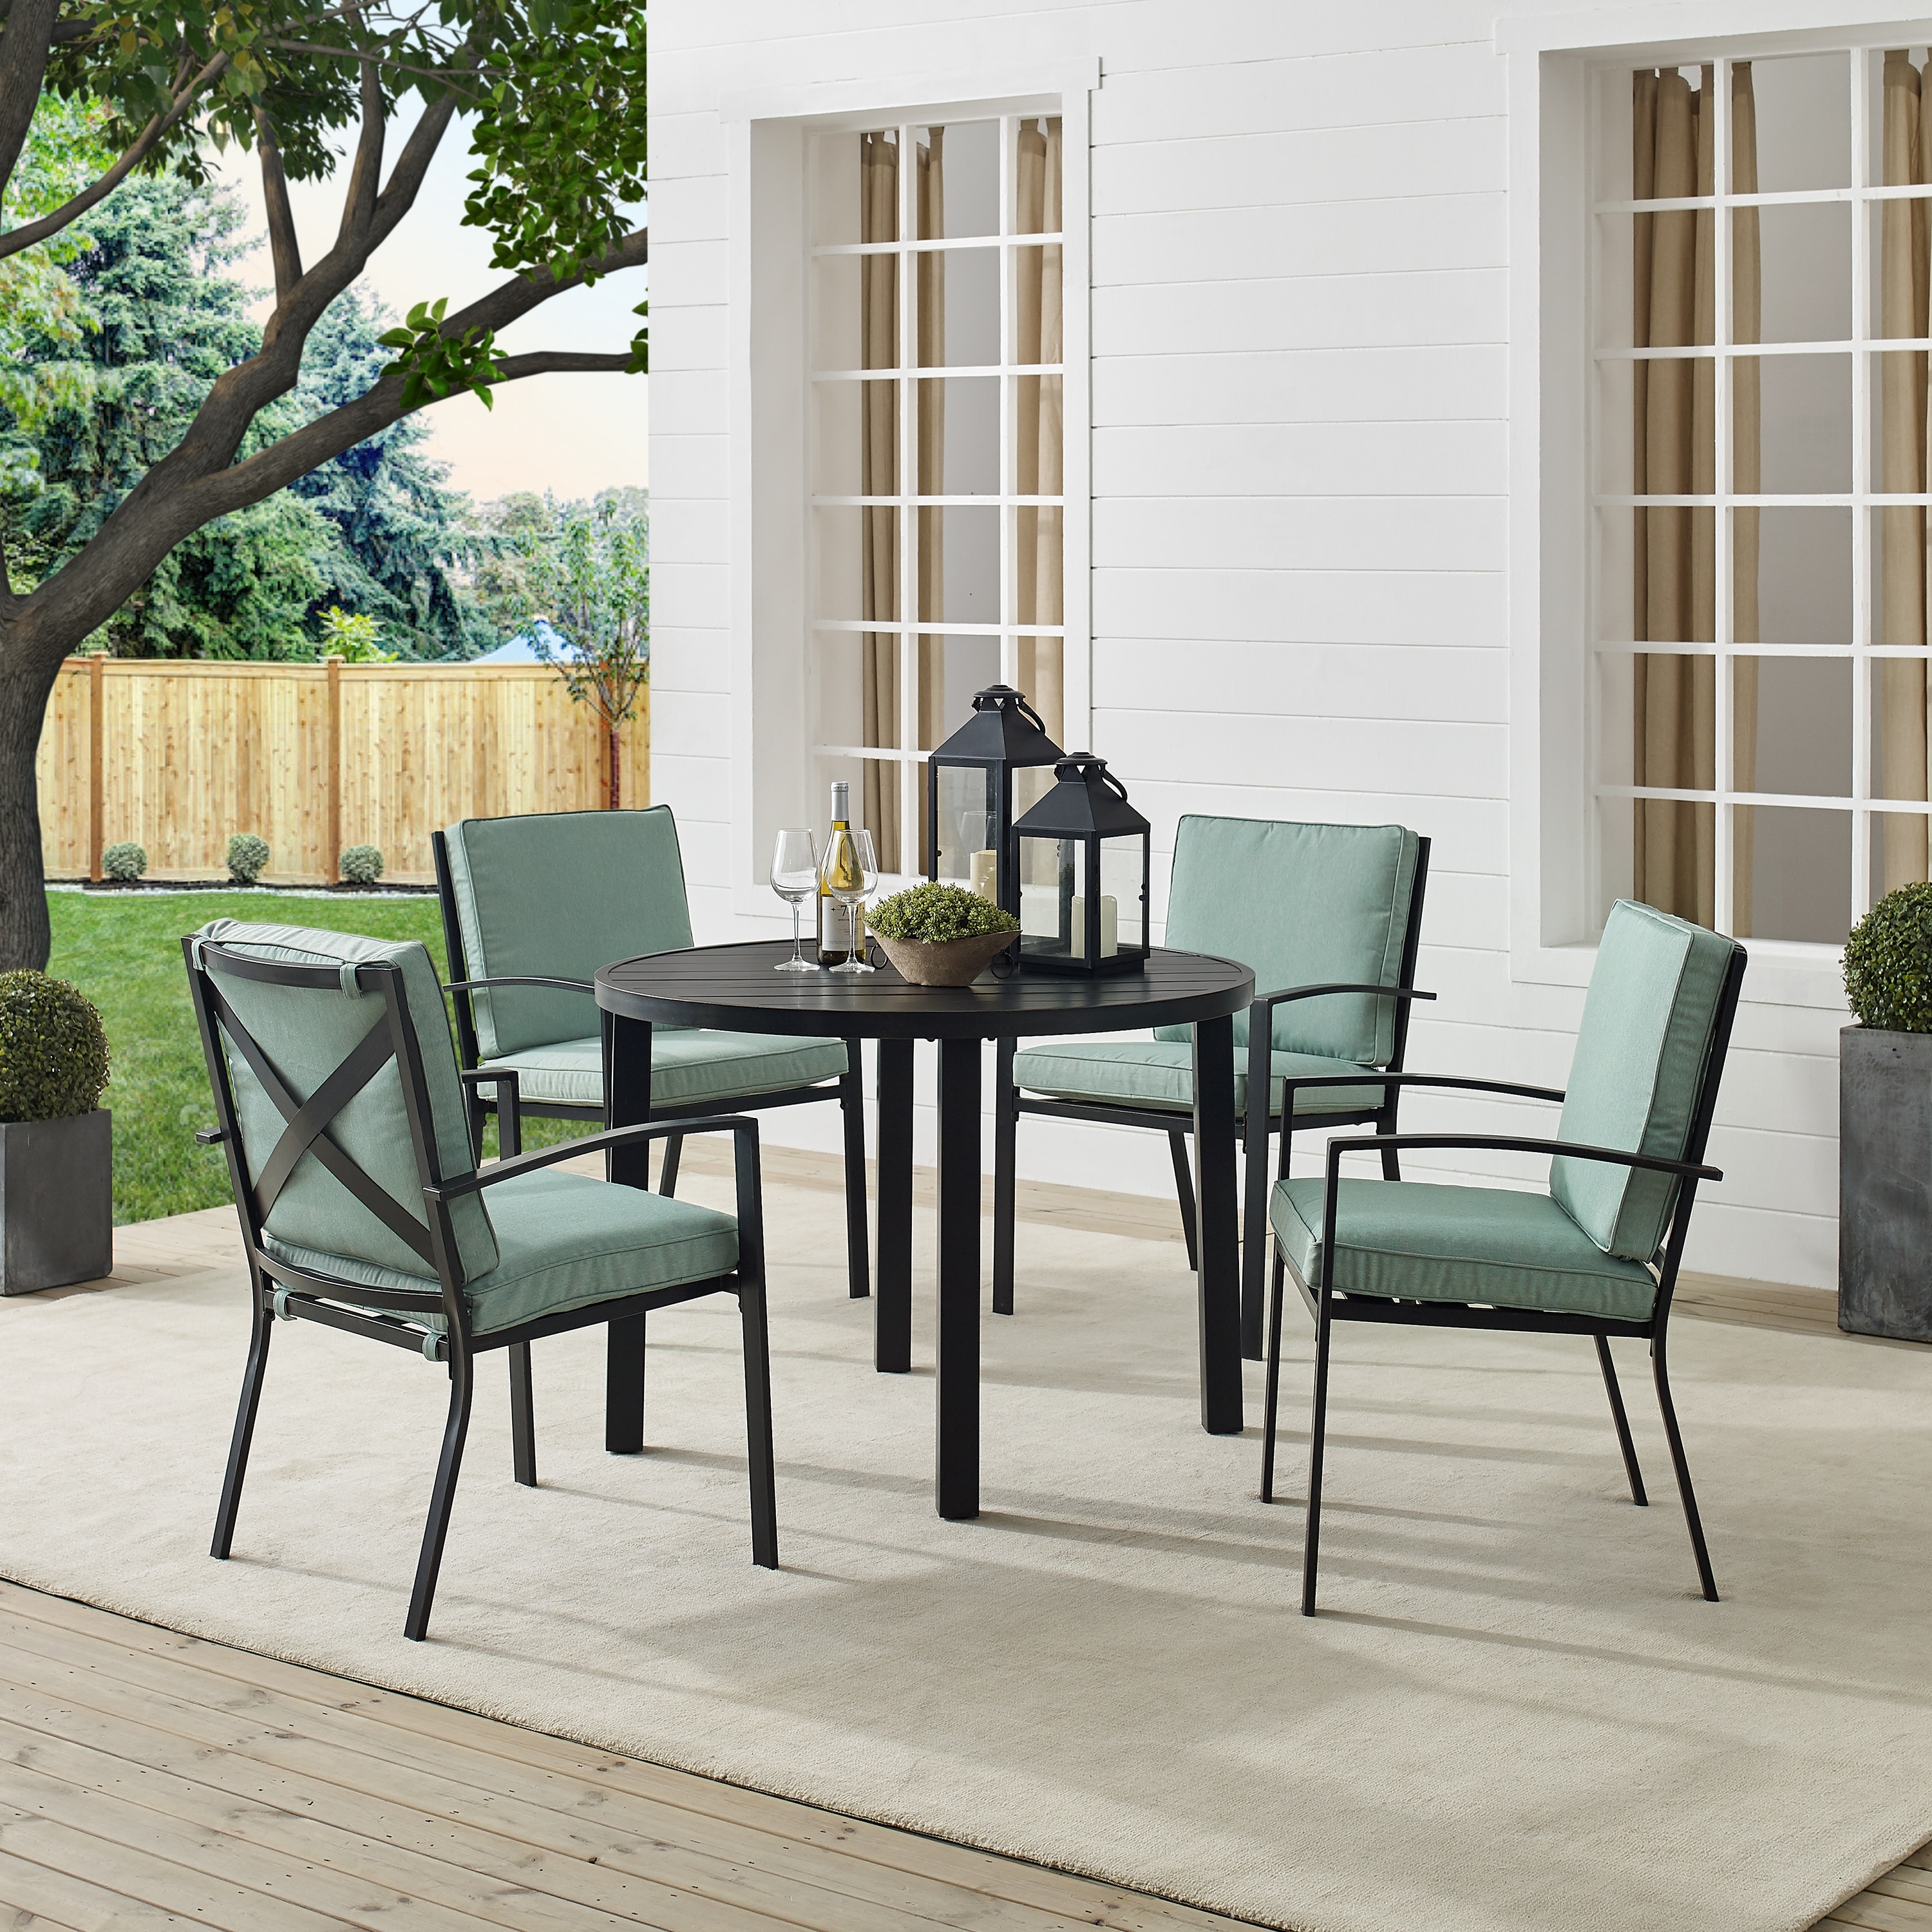 Kaplan 5pc Outdoor Metal Round Dining Set- Table and 4 Chairs